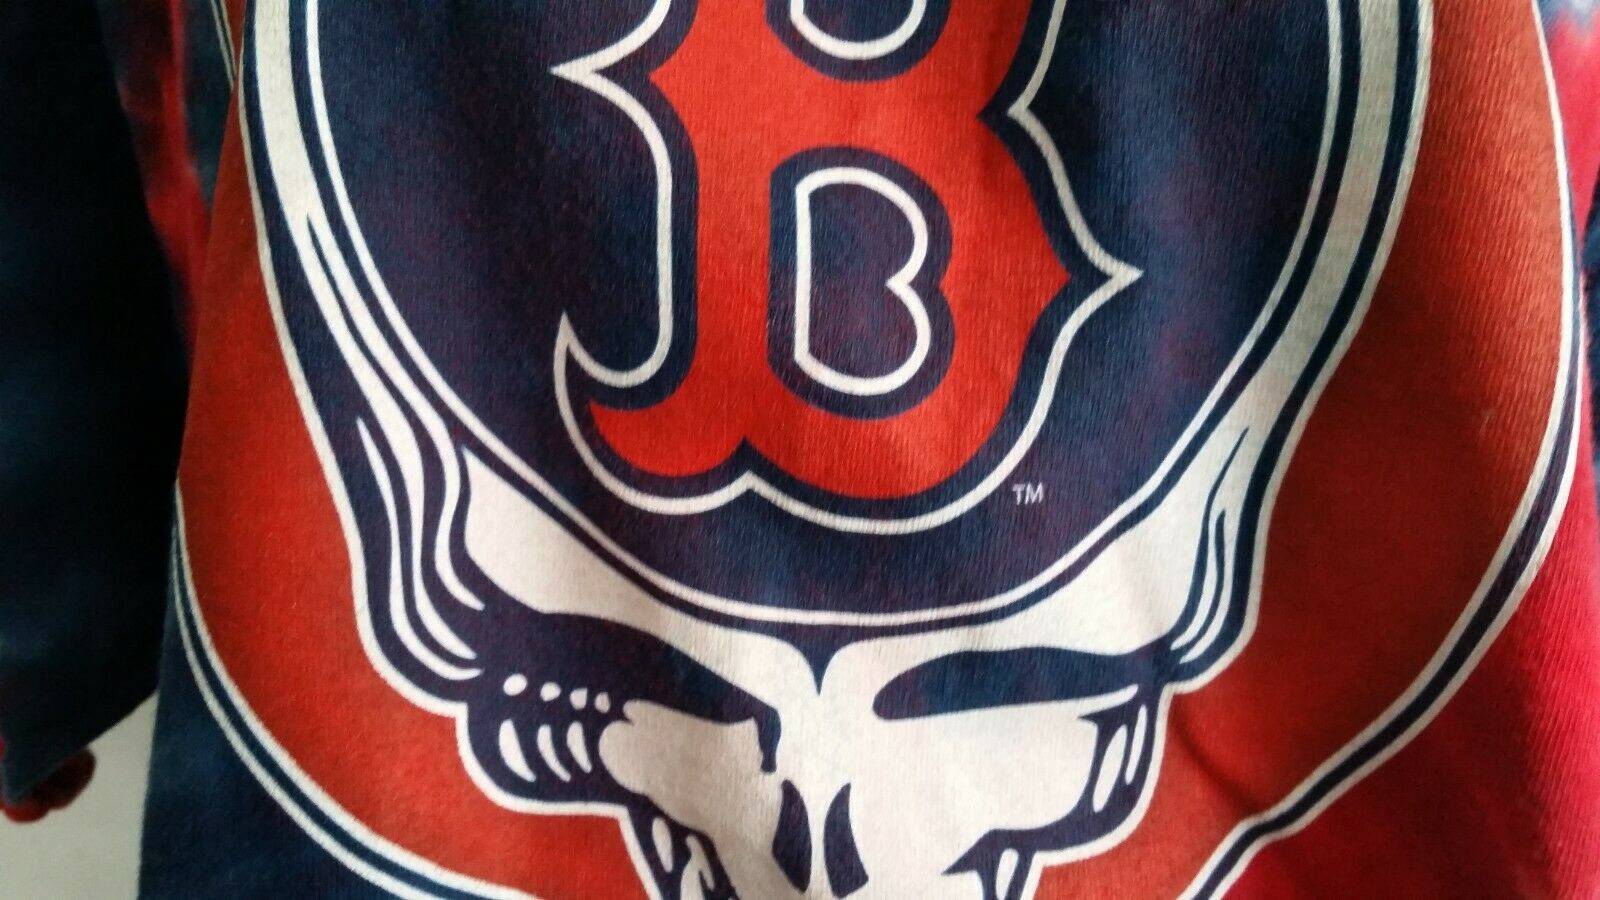 Boston Red Sox Steal Your Base Tie-Dye T-Shirt